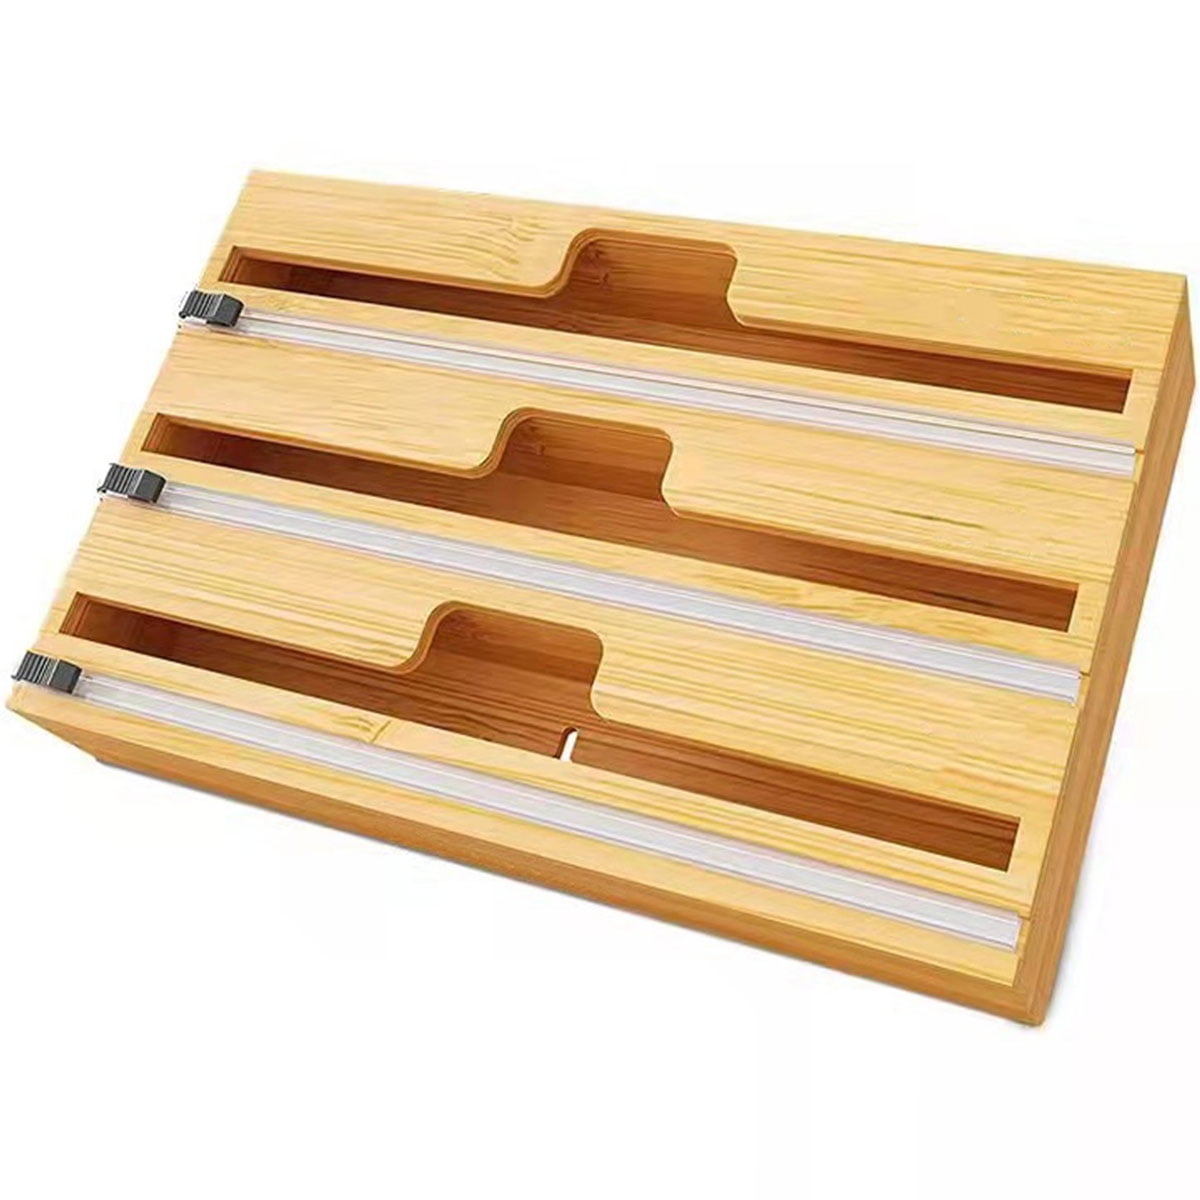 2 in 1 Wrap Dispenser with Cutter,Aluminum Foil and Wax Paper Dispenser for Kitchen Drawer,Bamboo Roll Organizer Holder 